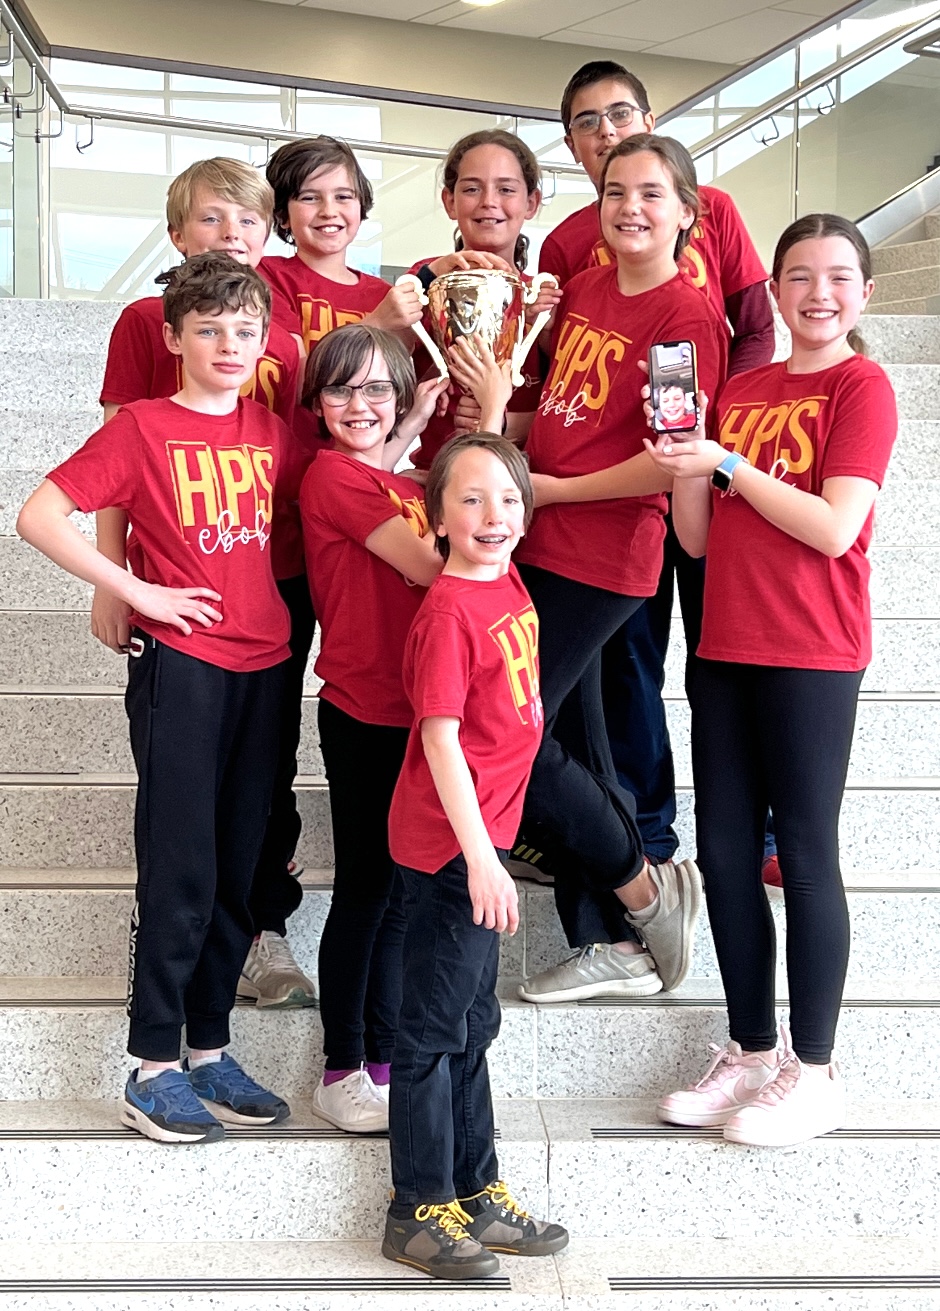 Hardin Park School won in both the elementary and middle school contests for the Battle of the Books competition